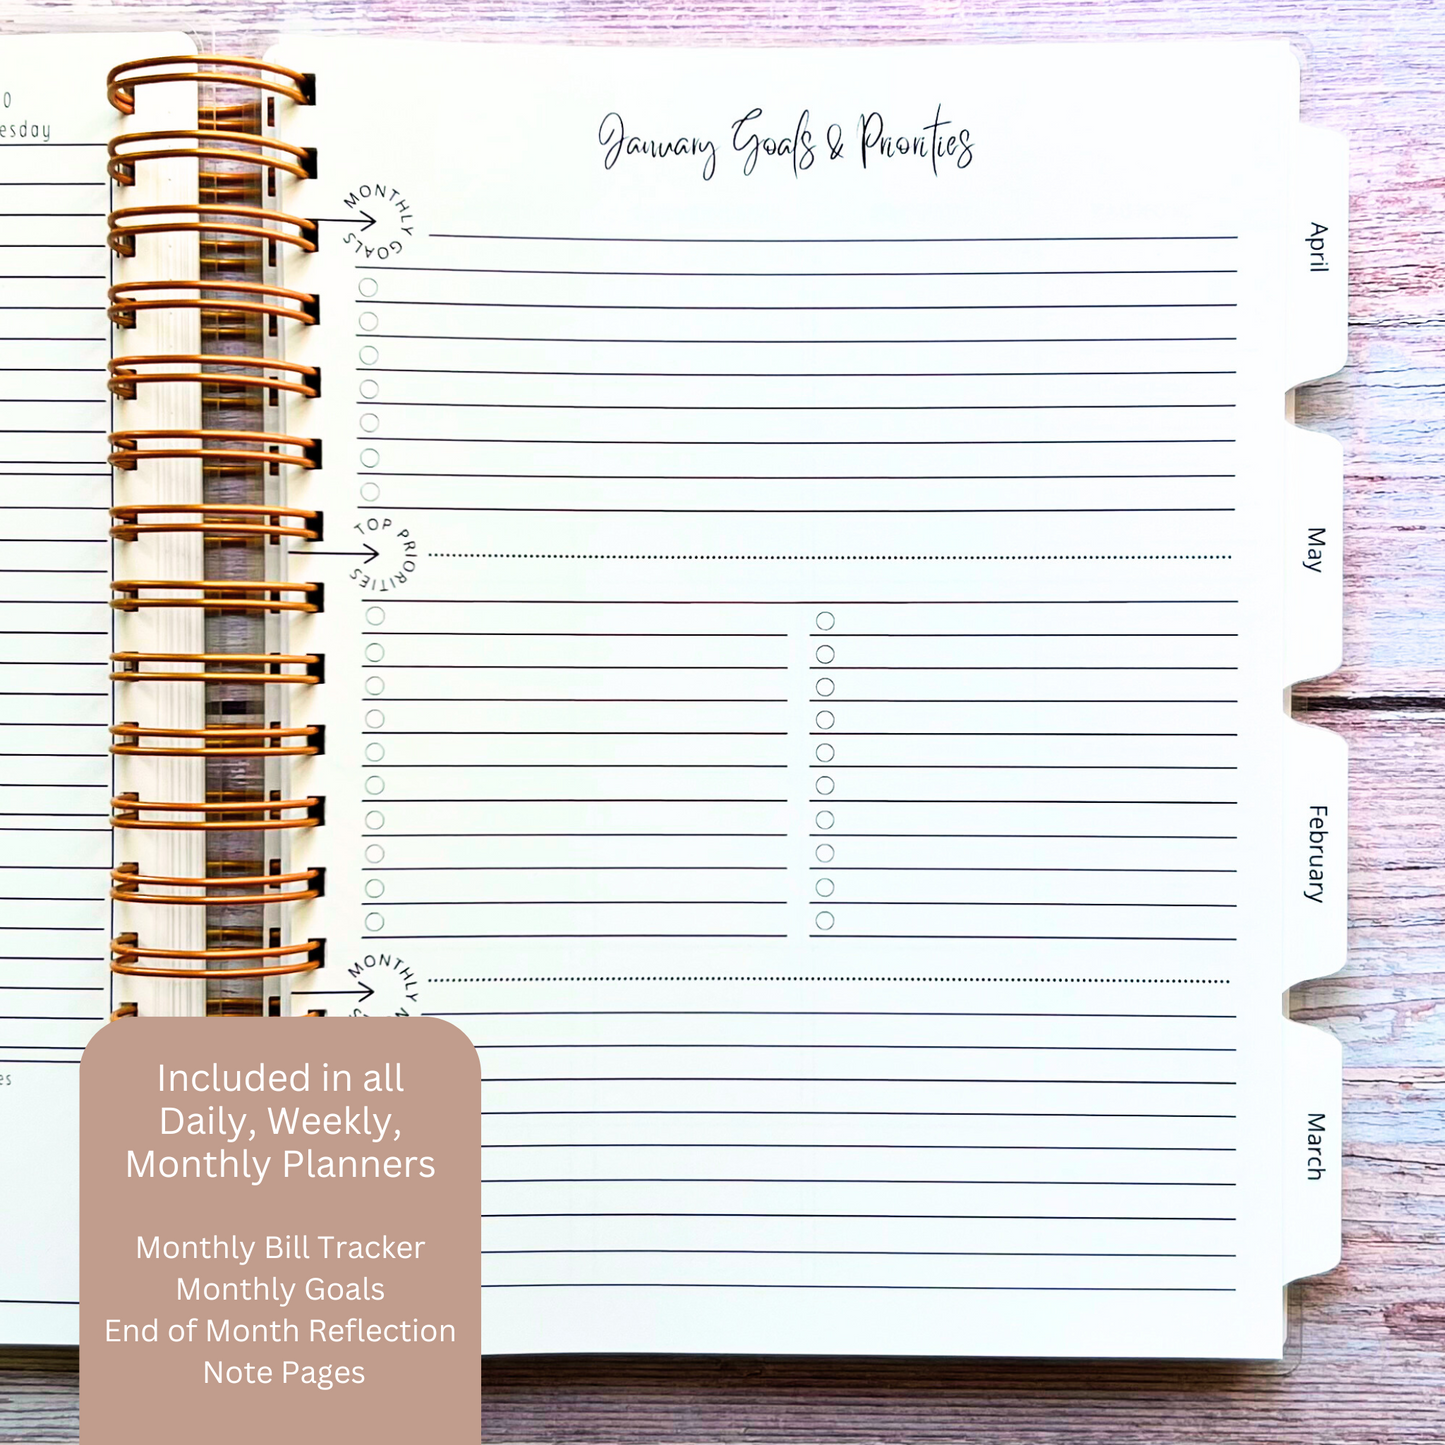 Personalized Weekly Planner | Dreams Happen